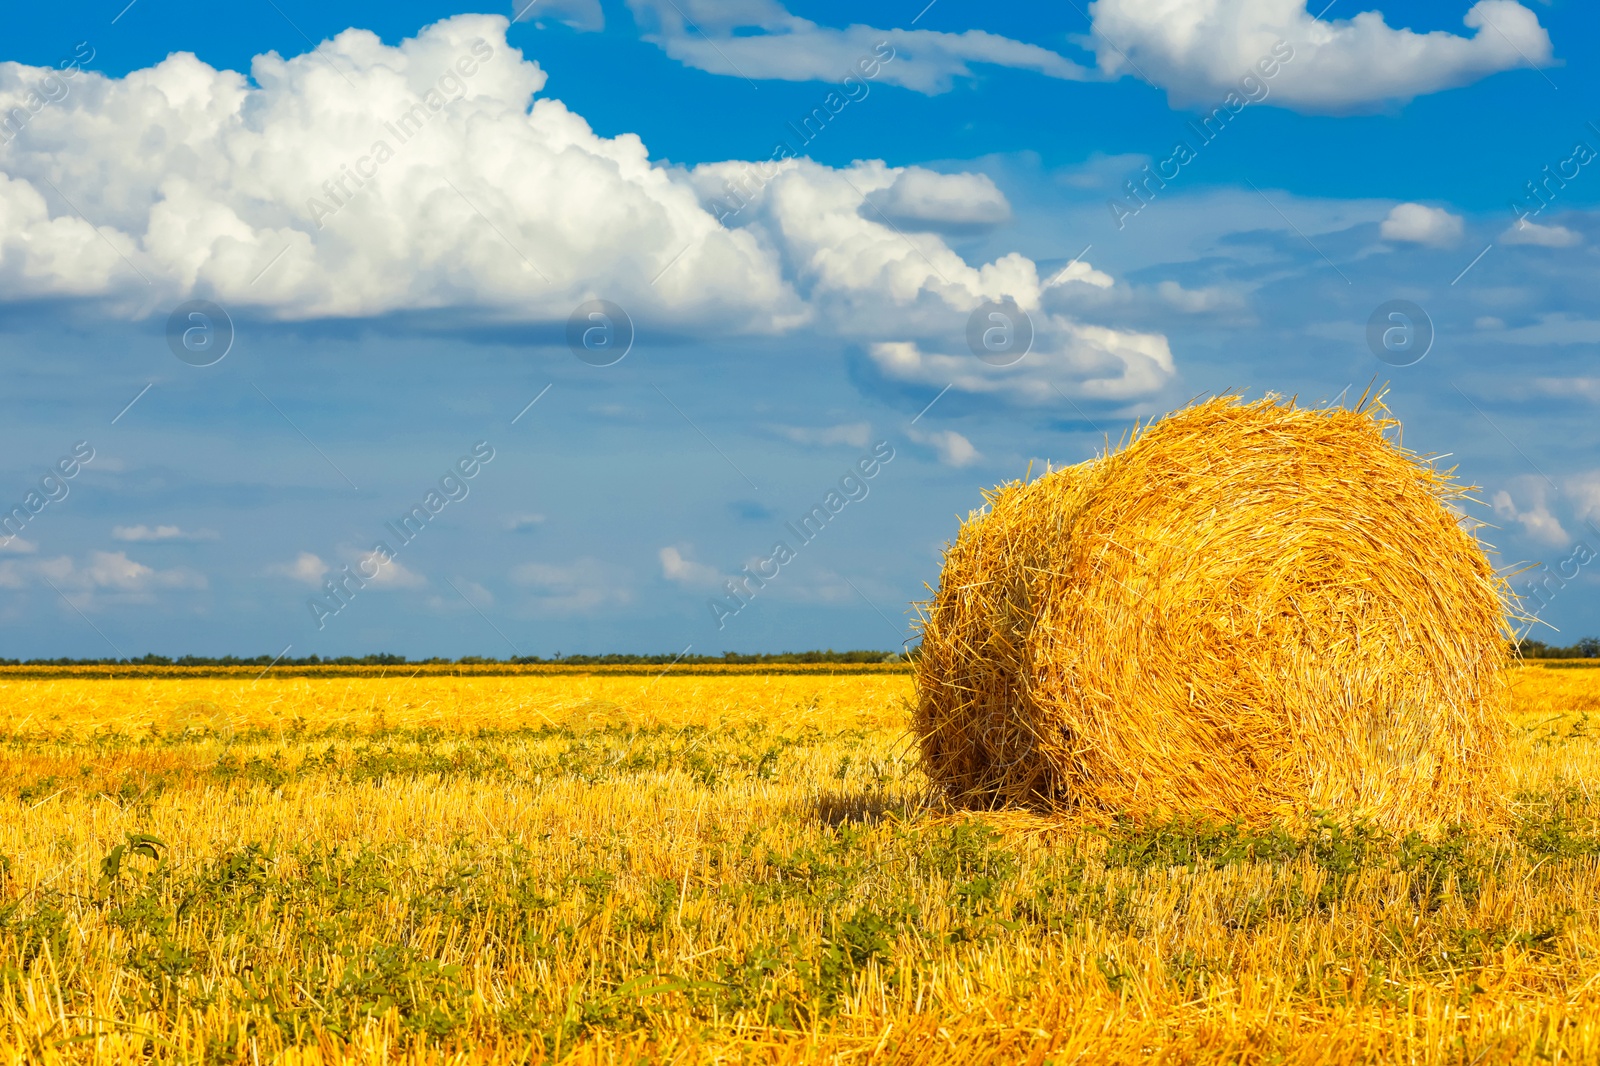 Image of Hay bale in golden field under blue sky. Space for text